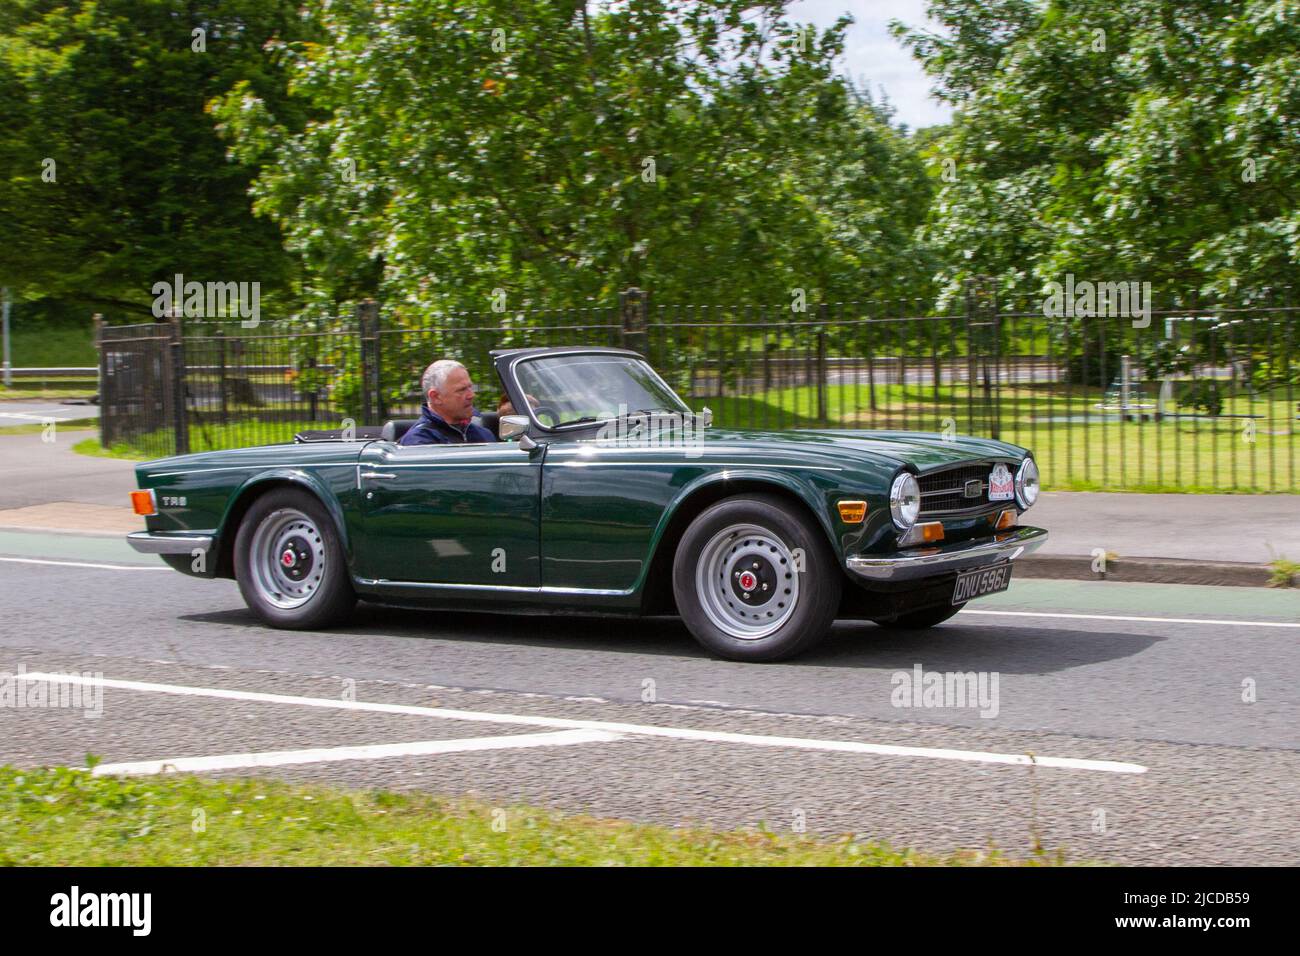 1973 70s seventies green Triumph TR6; automobiles featured during the 58th year of the Manchester to Blackpool Touring Assembly for Veteran, Vintage, Classic and Cherished cars. Stock Photo